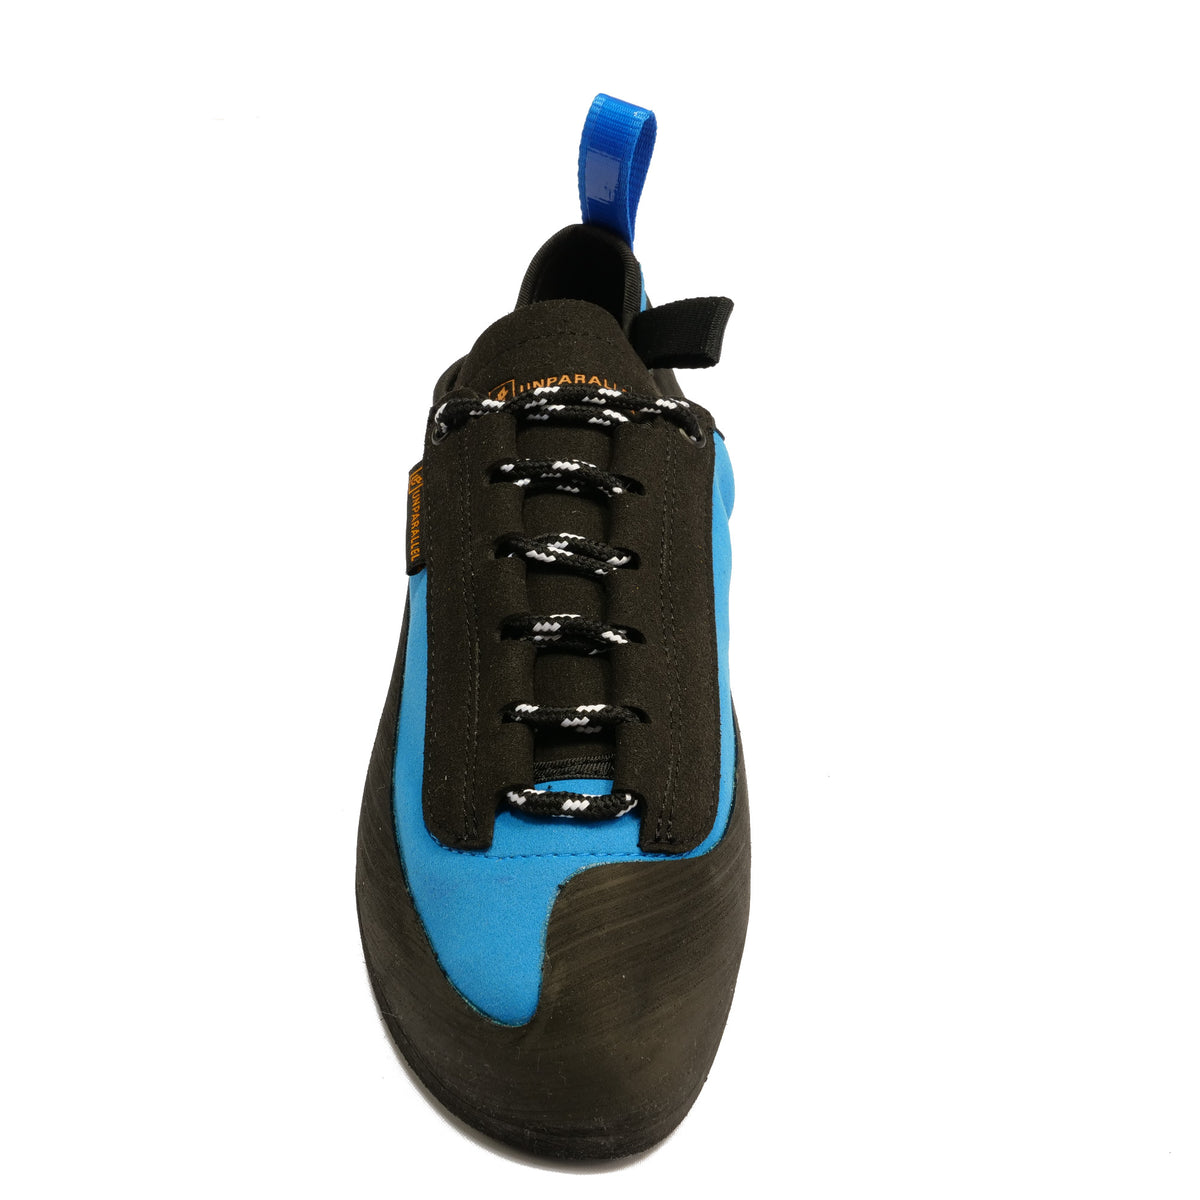 Tilted front view of the Unparallel Up Lace climbing shoe in Blue and black 